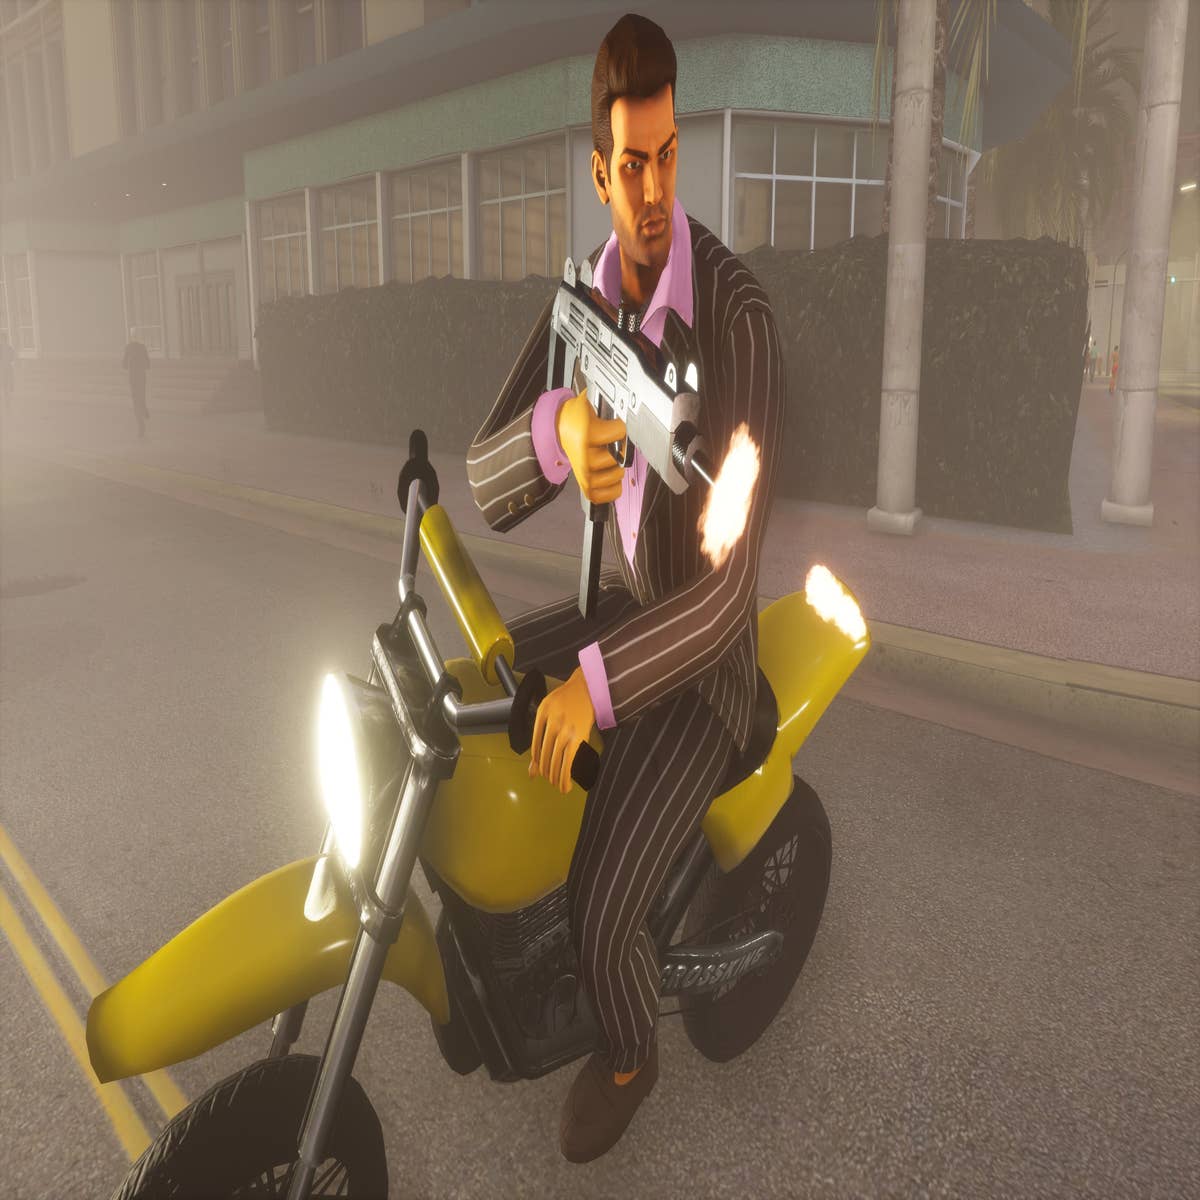 What should change with a GTA 3 remaster?